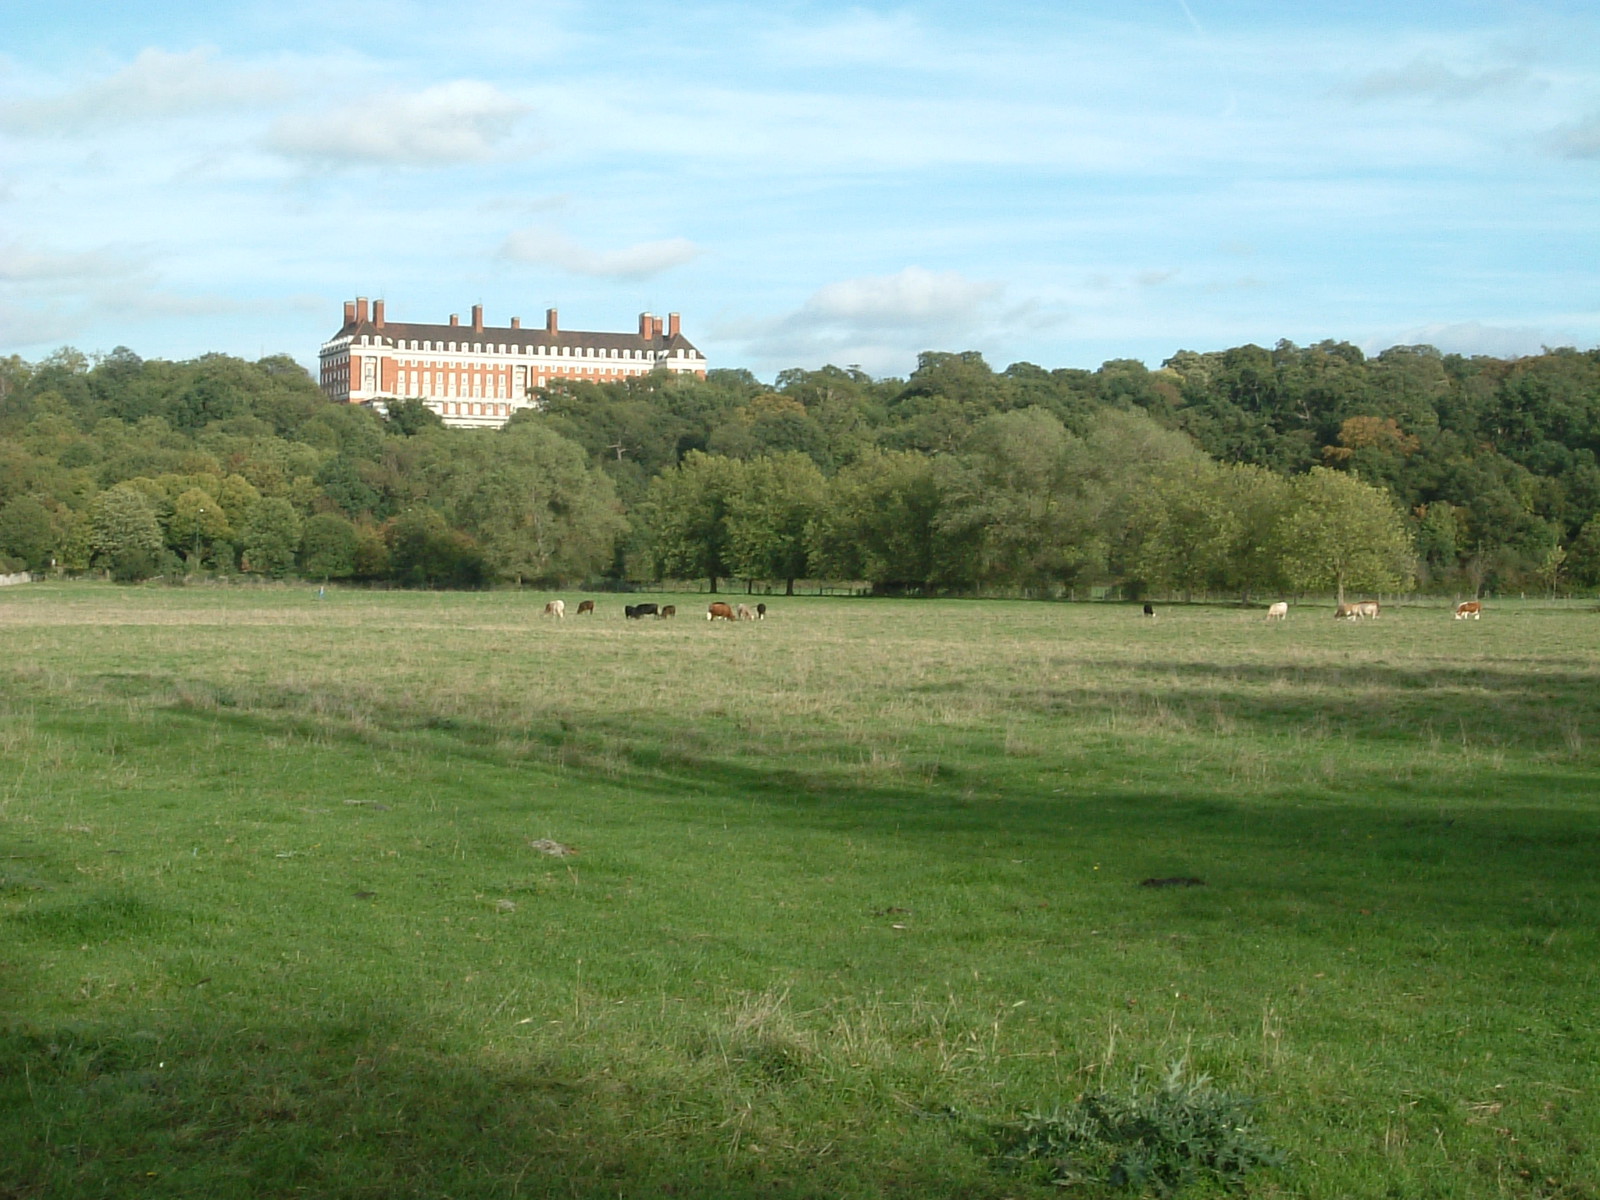 The view towards the Star and Garter Home from the Thames Path at Petersham Meadow